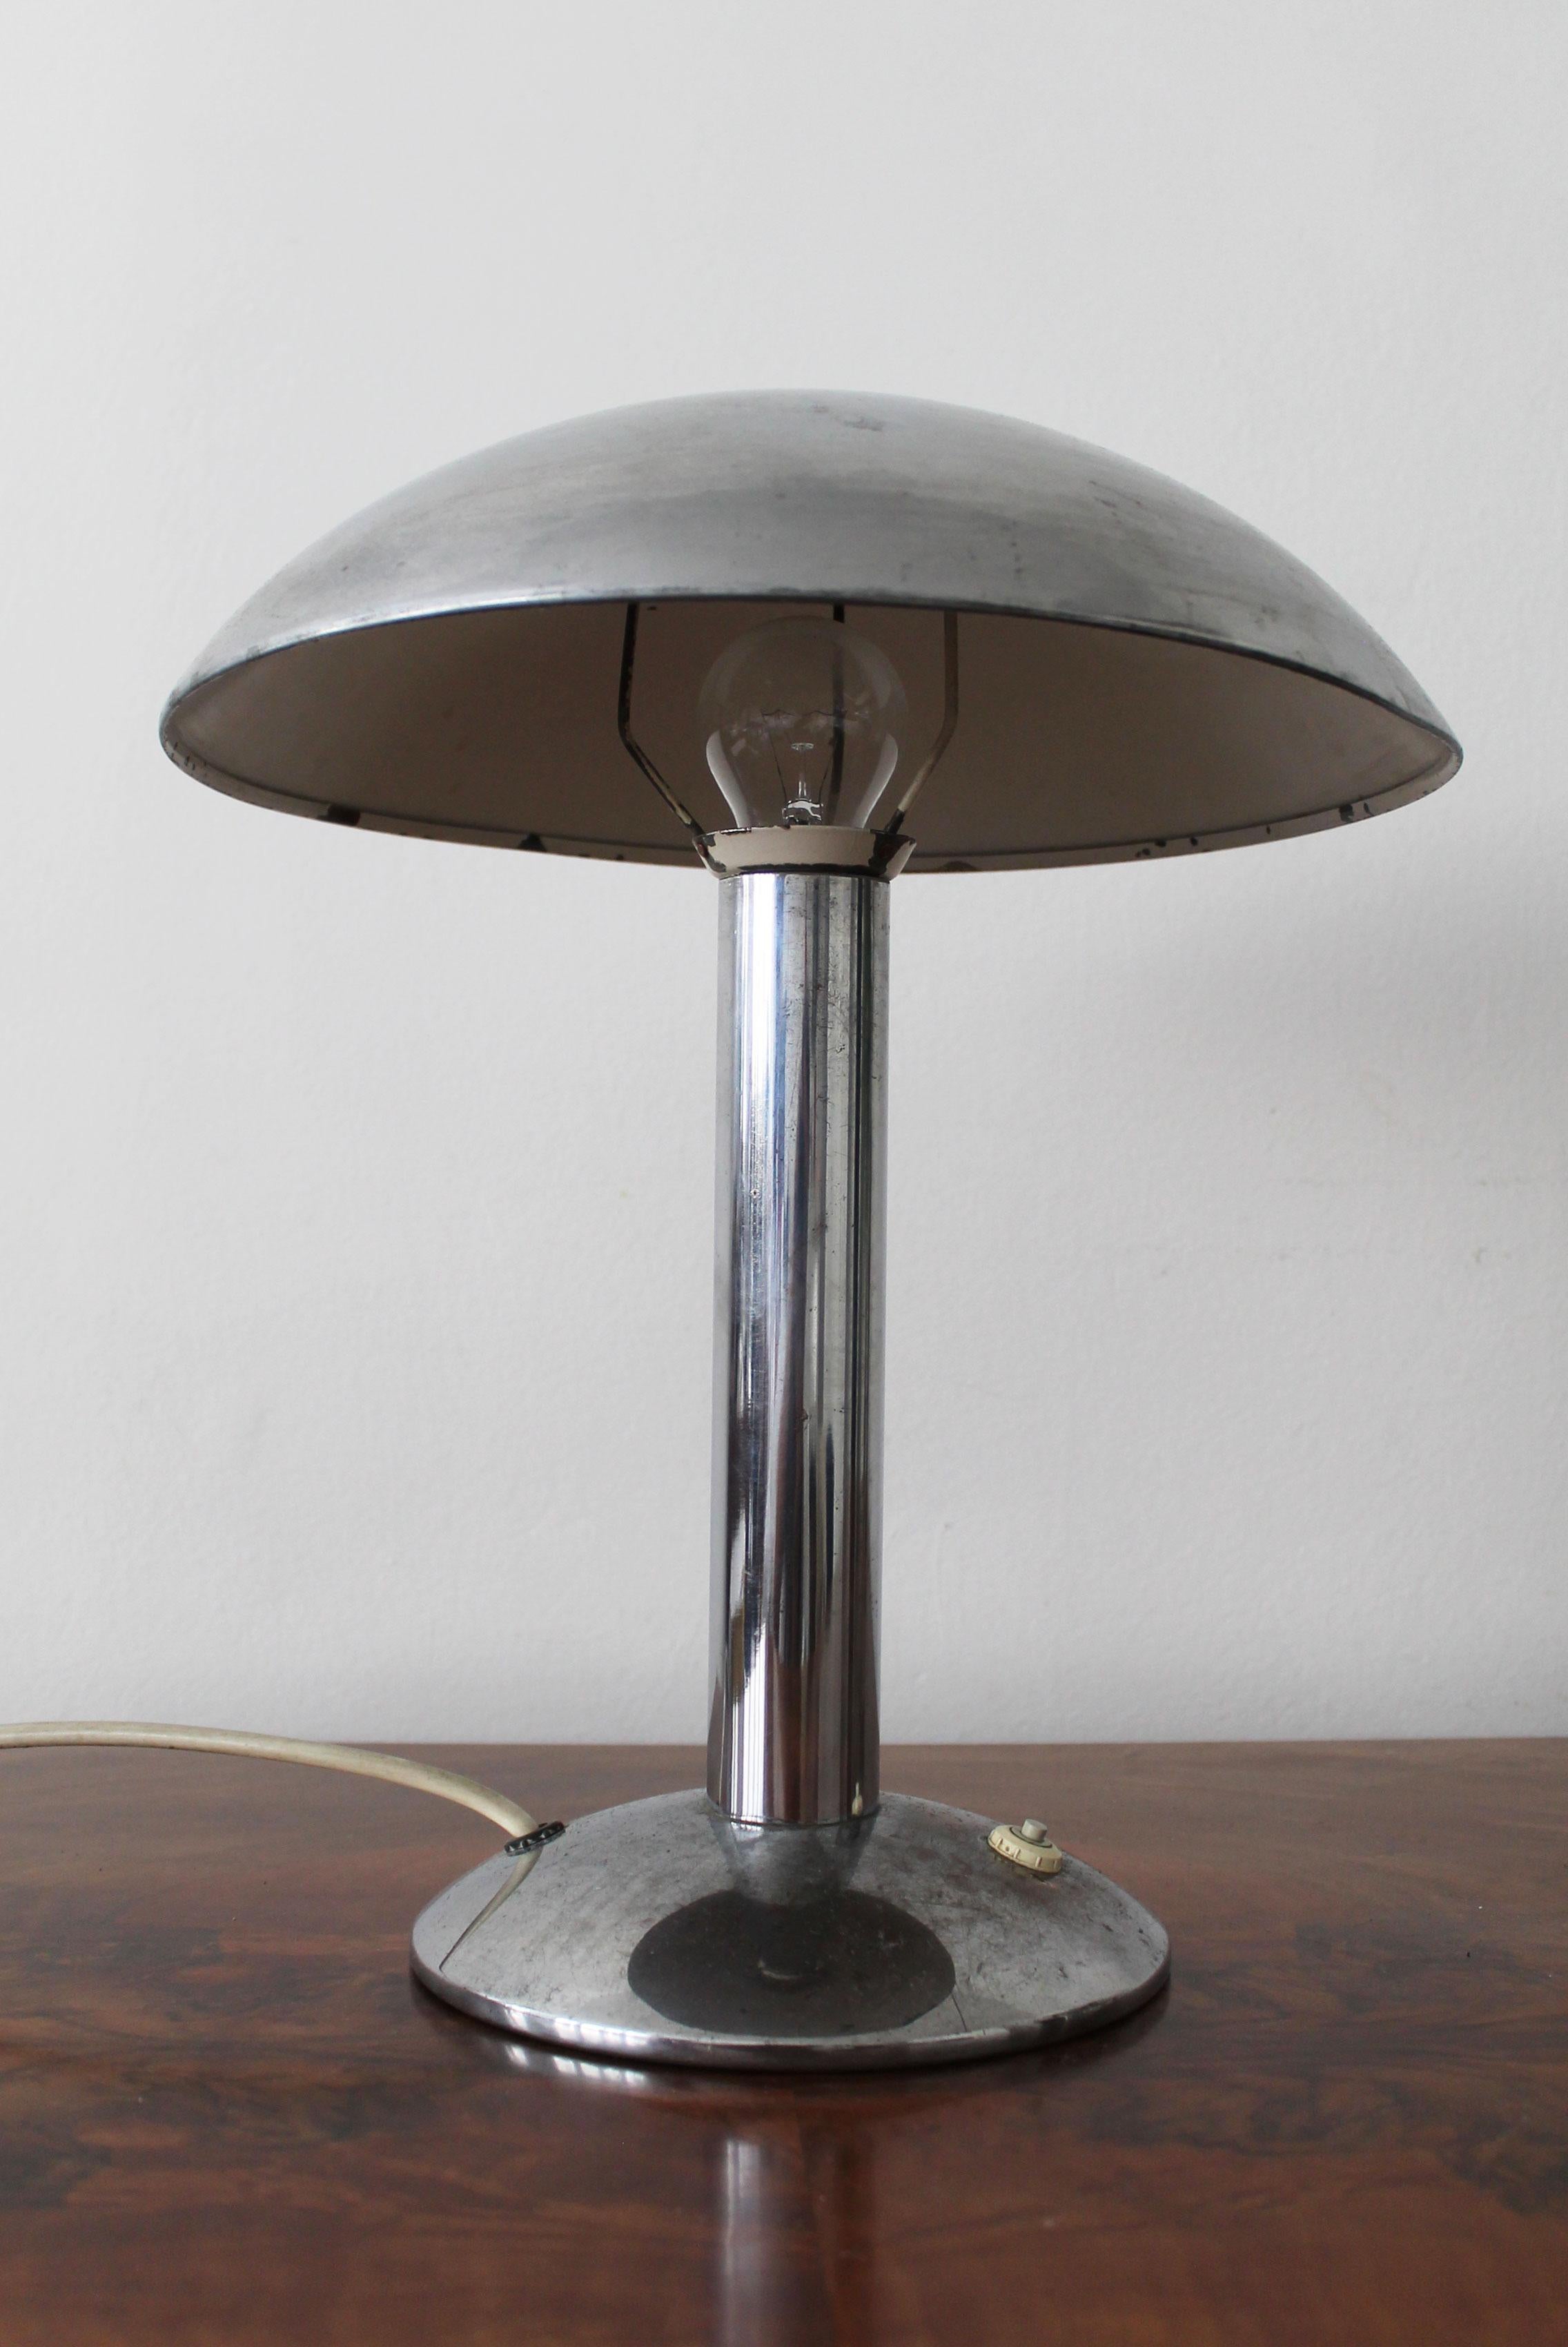 This Modernist Chrome table lamp was produced by NAPAKO Company in the 1930’s but was originally designed by lighting engineer Miloslav Prokop for the Vorel Praha Company.

Miloslav Prokop was a visionary and the most influential lighting designer